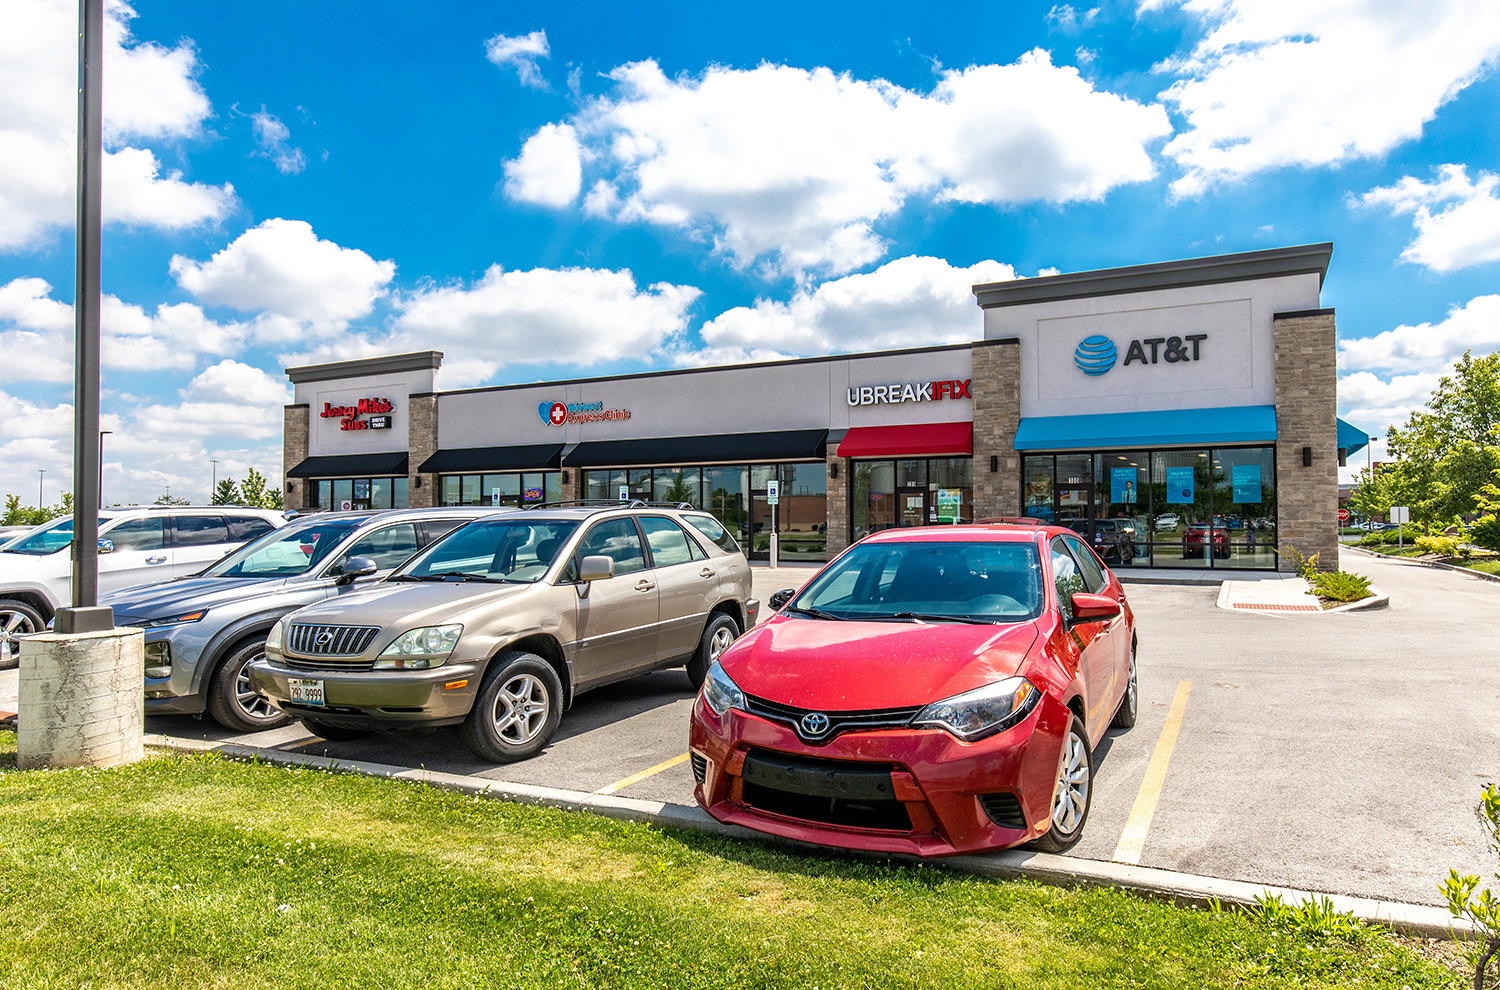 Hanley Investment Group Arranges Sale of Chicagoland Multi-Tenant Retail Pad at Walmart-Anchored Center for $4.4 Million